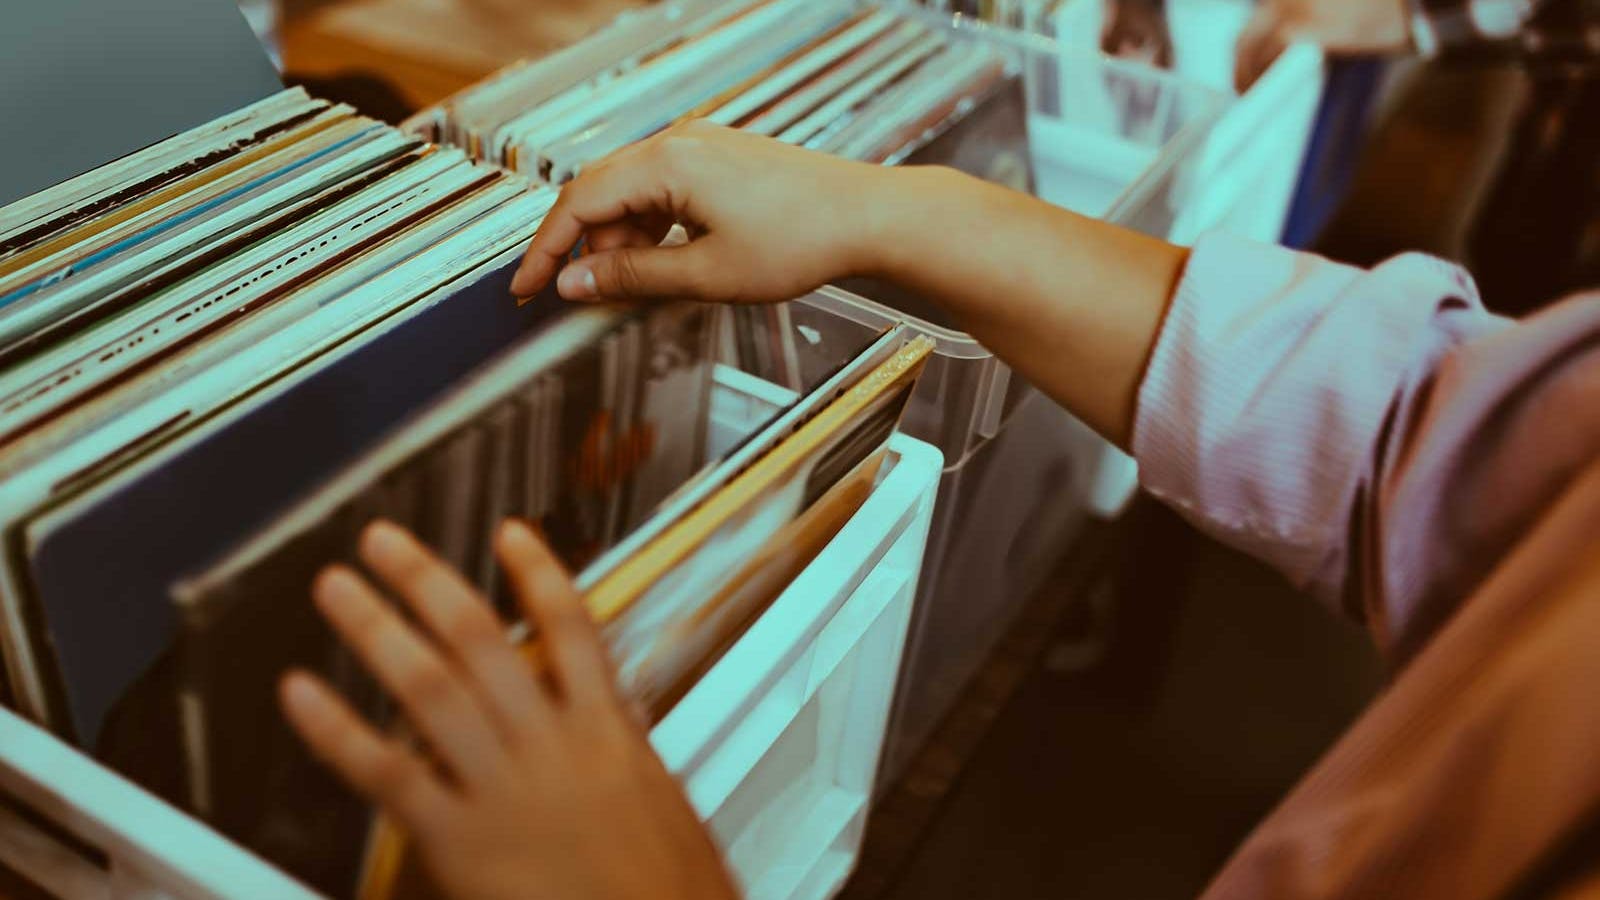 PSA A Vinyl Record Market & Listening Party Is Coming To South Bank